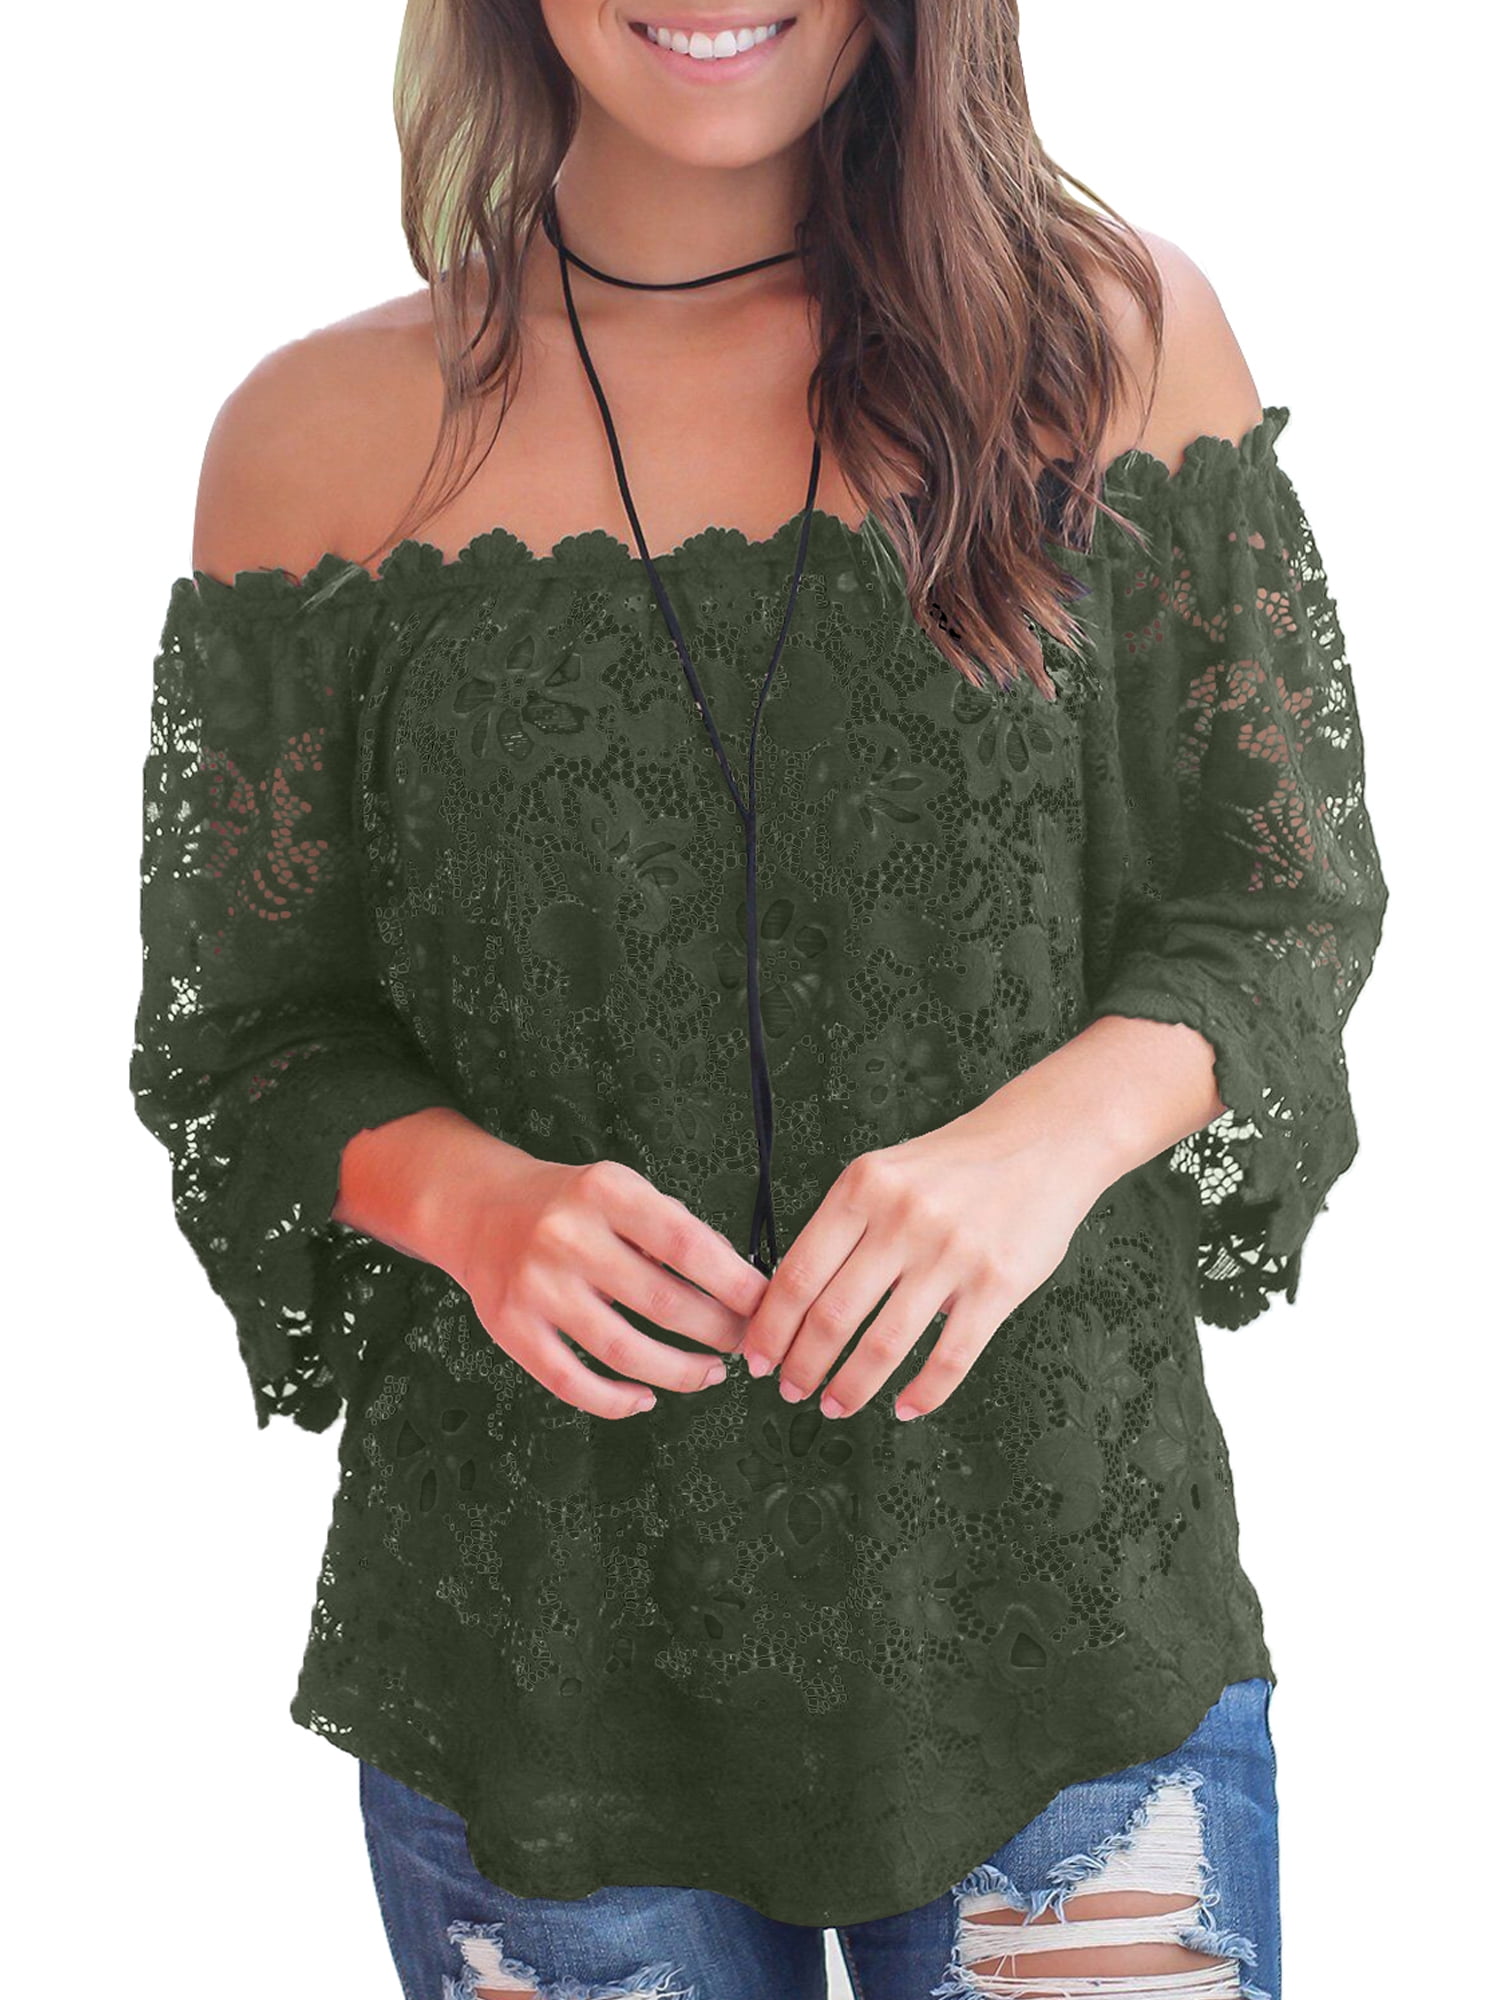 MIHOLL Women's Off Shoulder Lace Tops Casual Loose Blouse 3/4 Sleeve ...